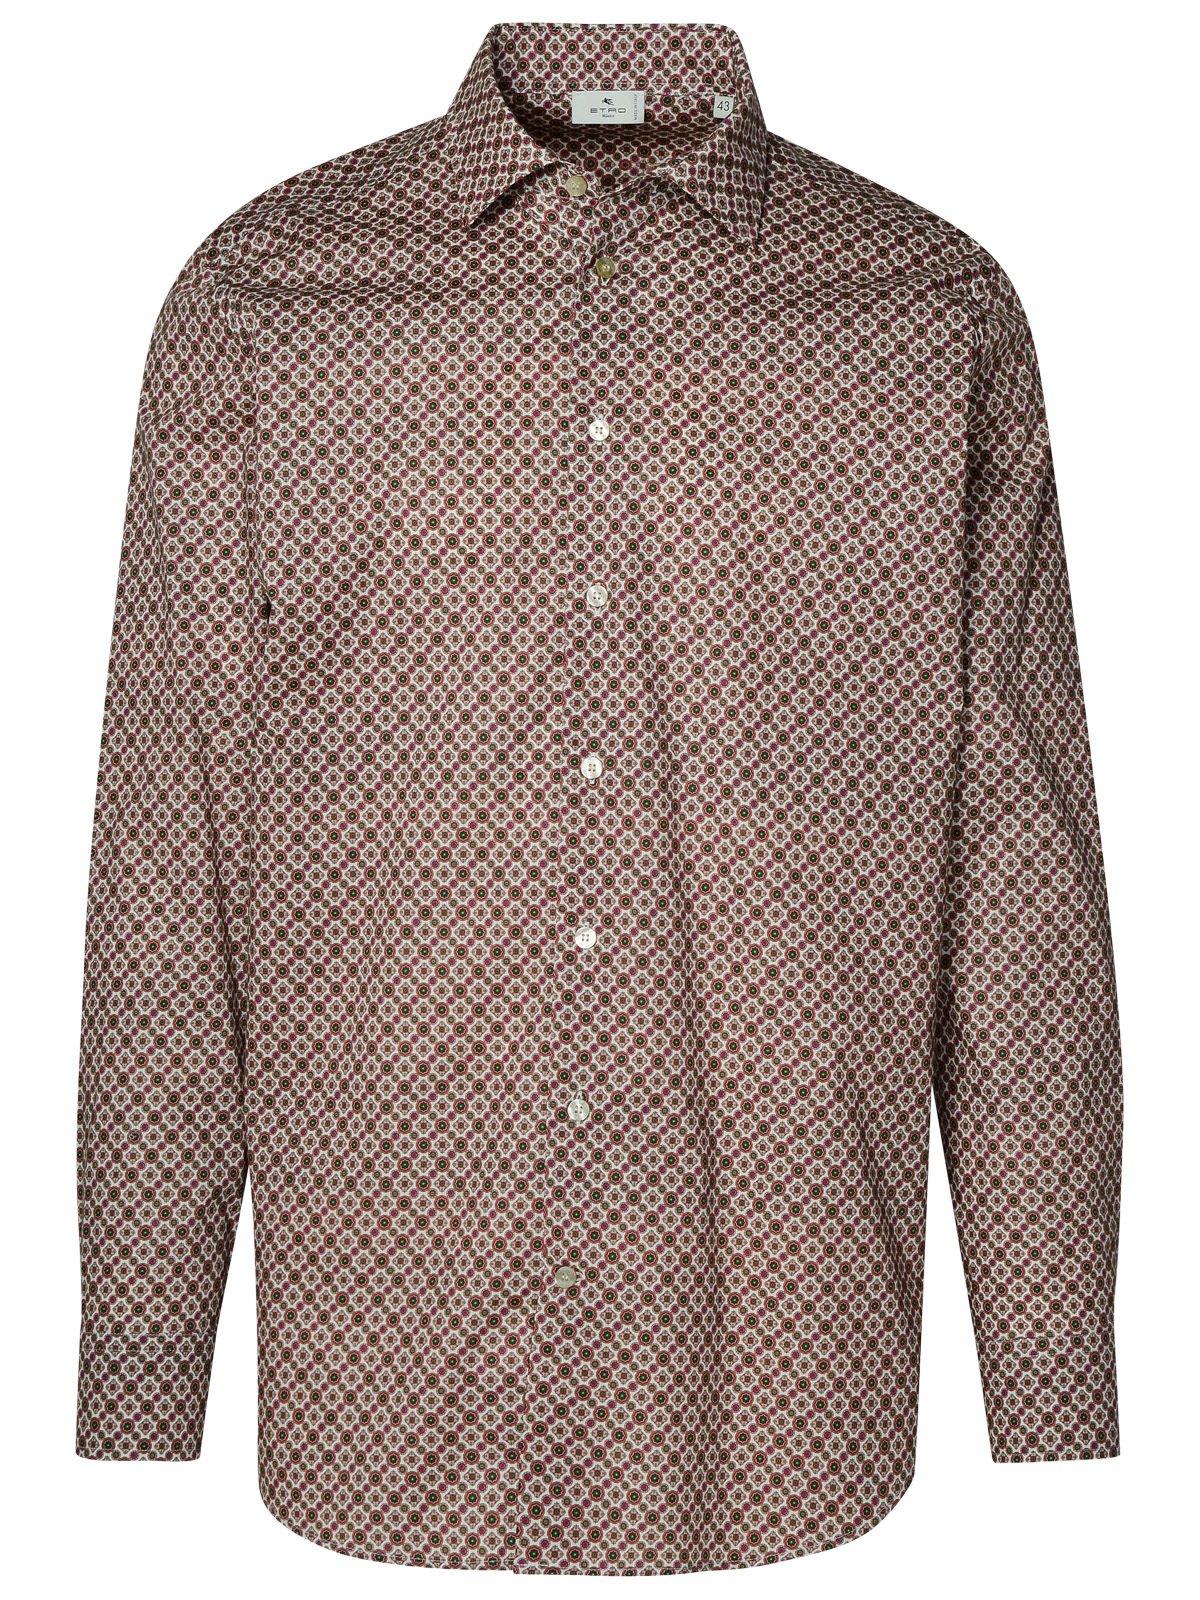 ETRO GRAPHIC PRINTED LONG SLEEVED SHIRT